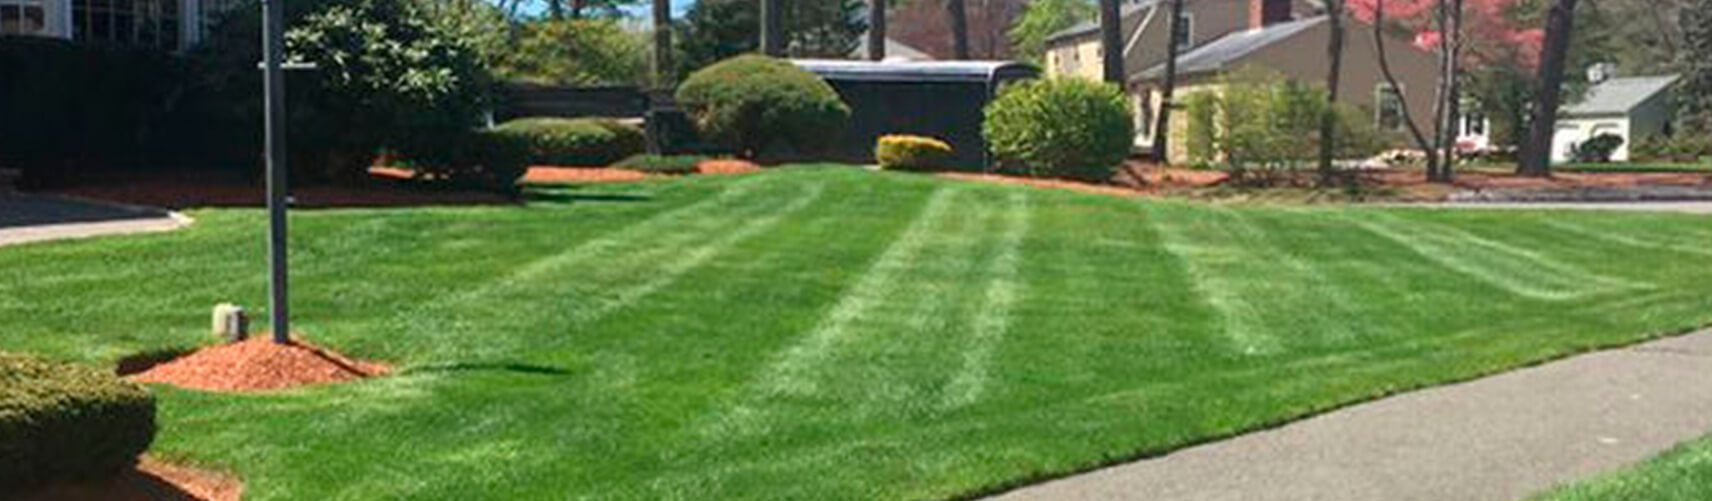 Wakefield Landscaping Company, Landscaper and Landscaping Services